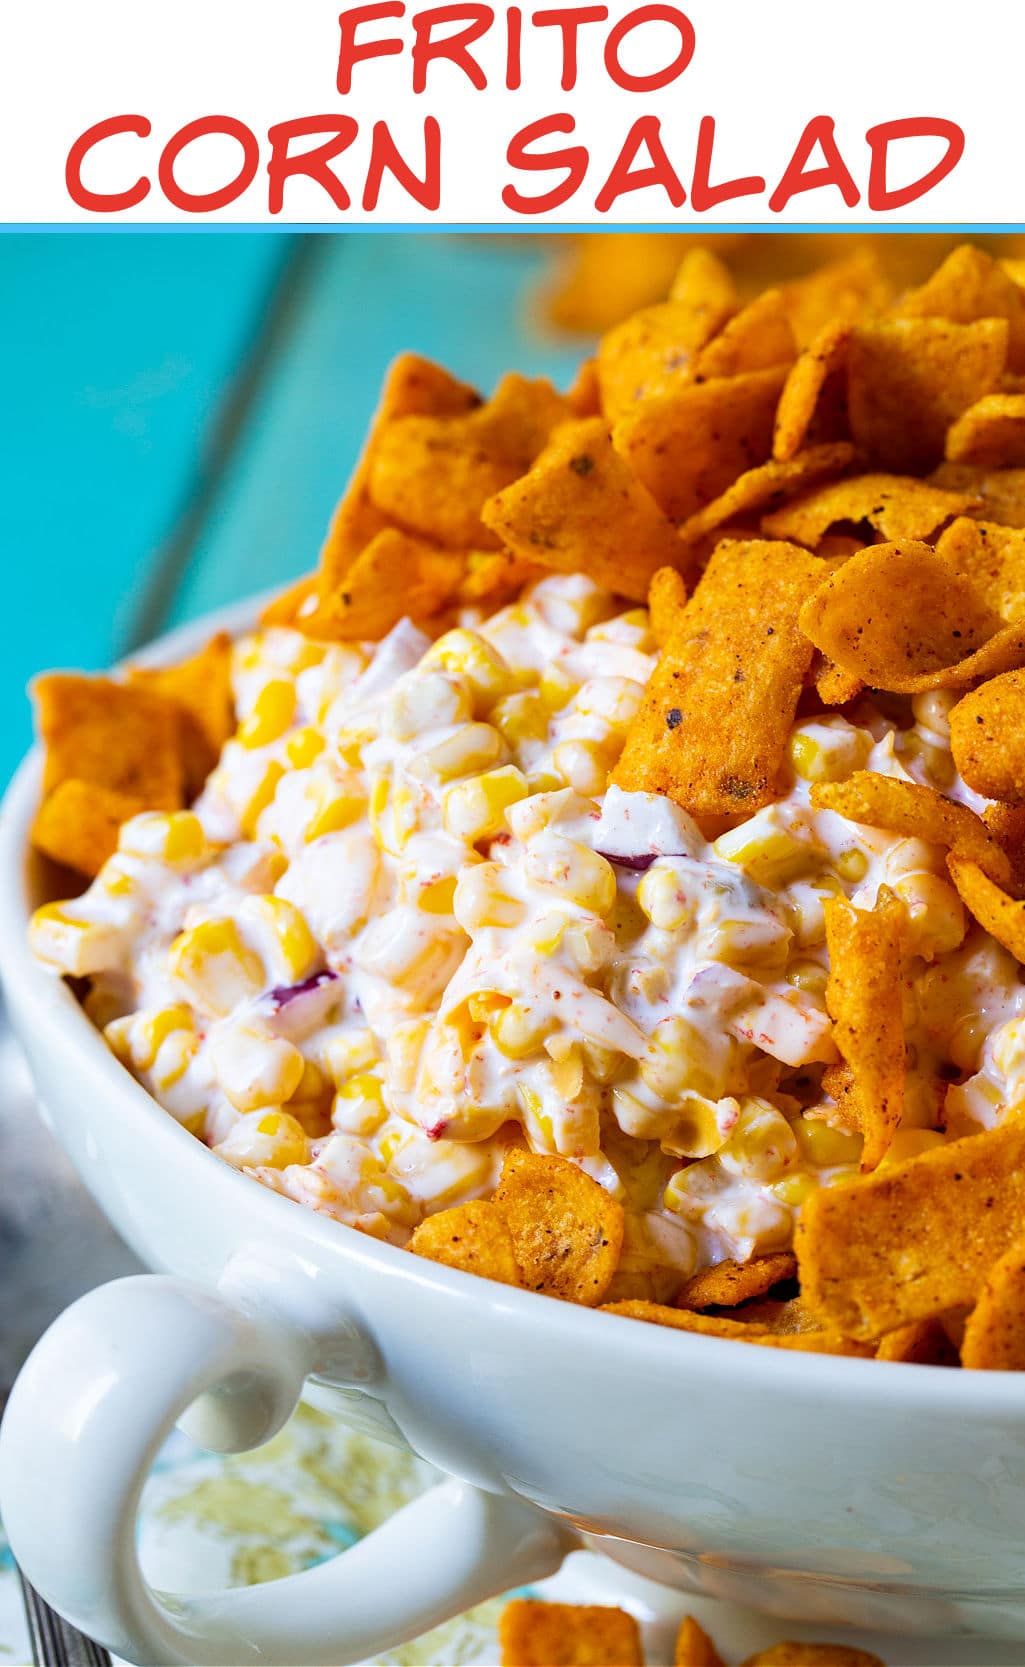 Corn Salad topped with frito chips in a serving bowl.